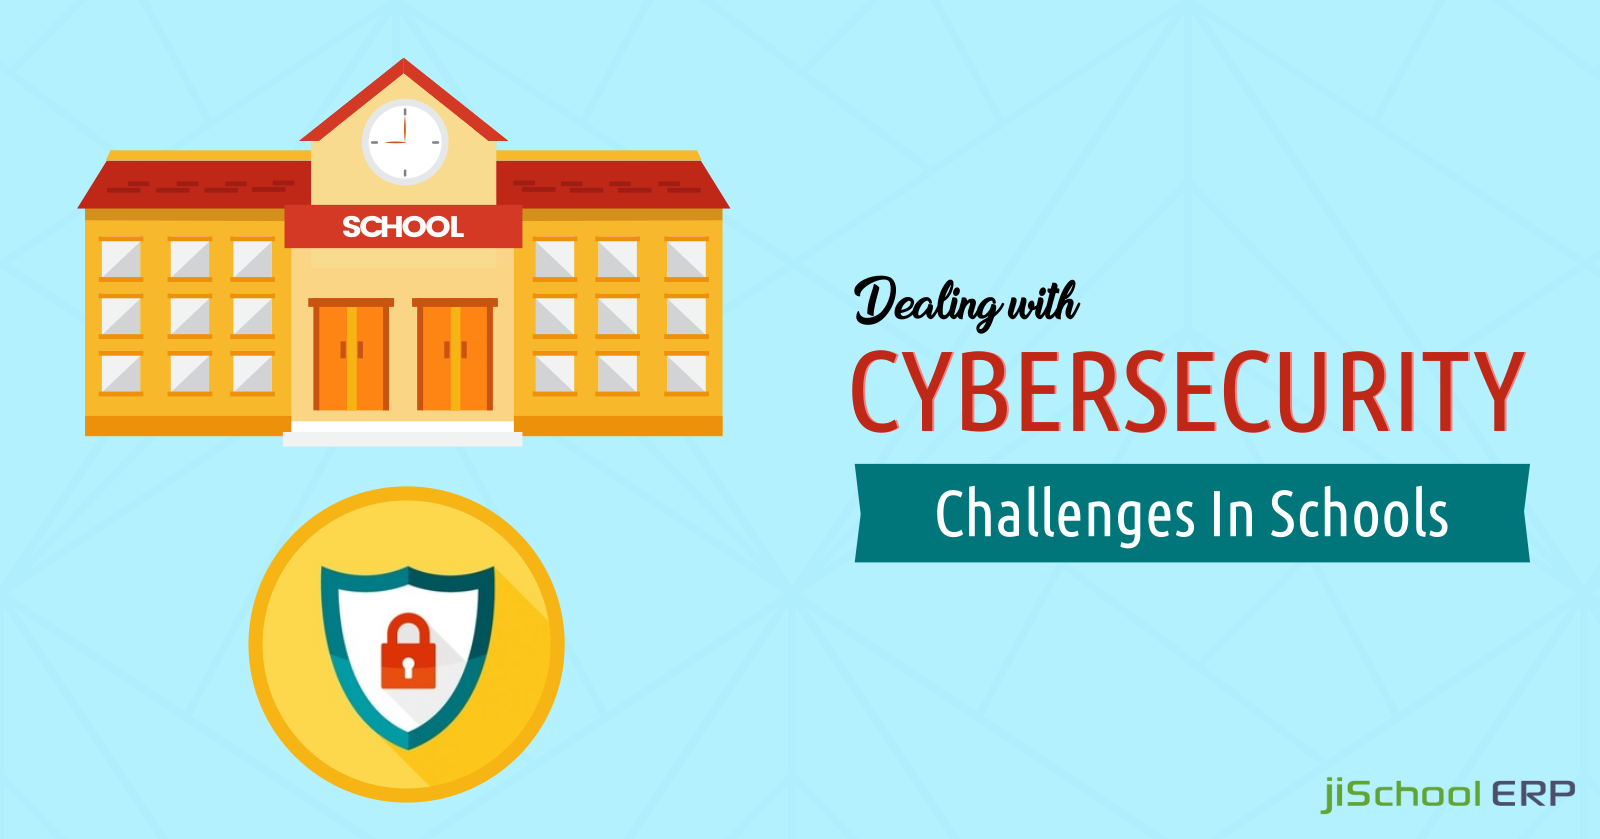 Best Way to Deal with Cybersecurity Challenges in Schools